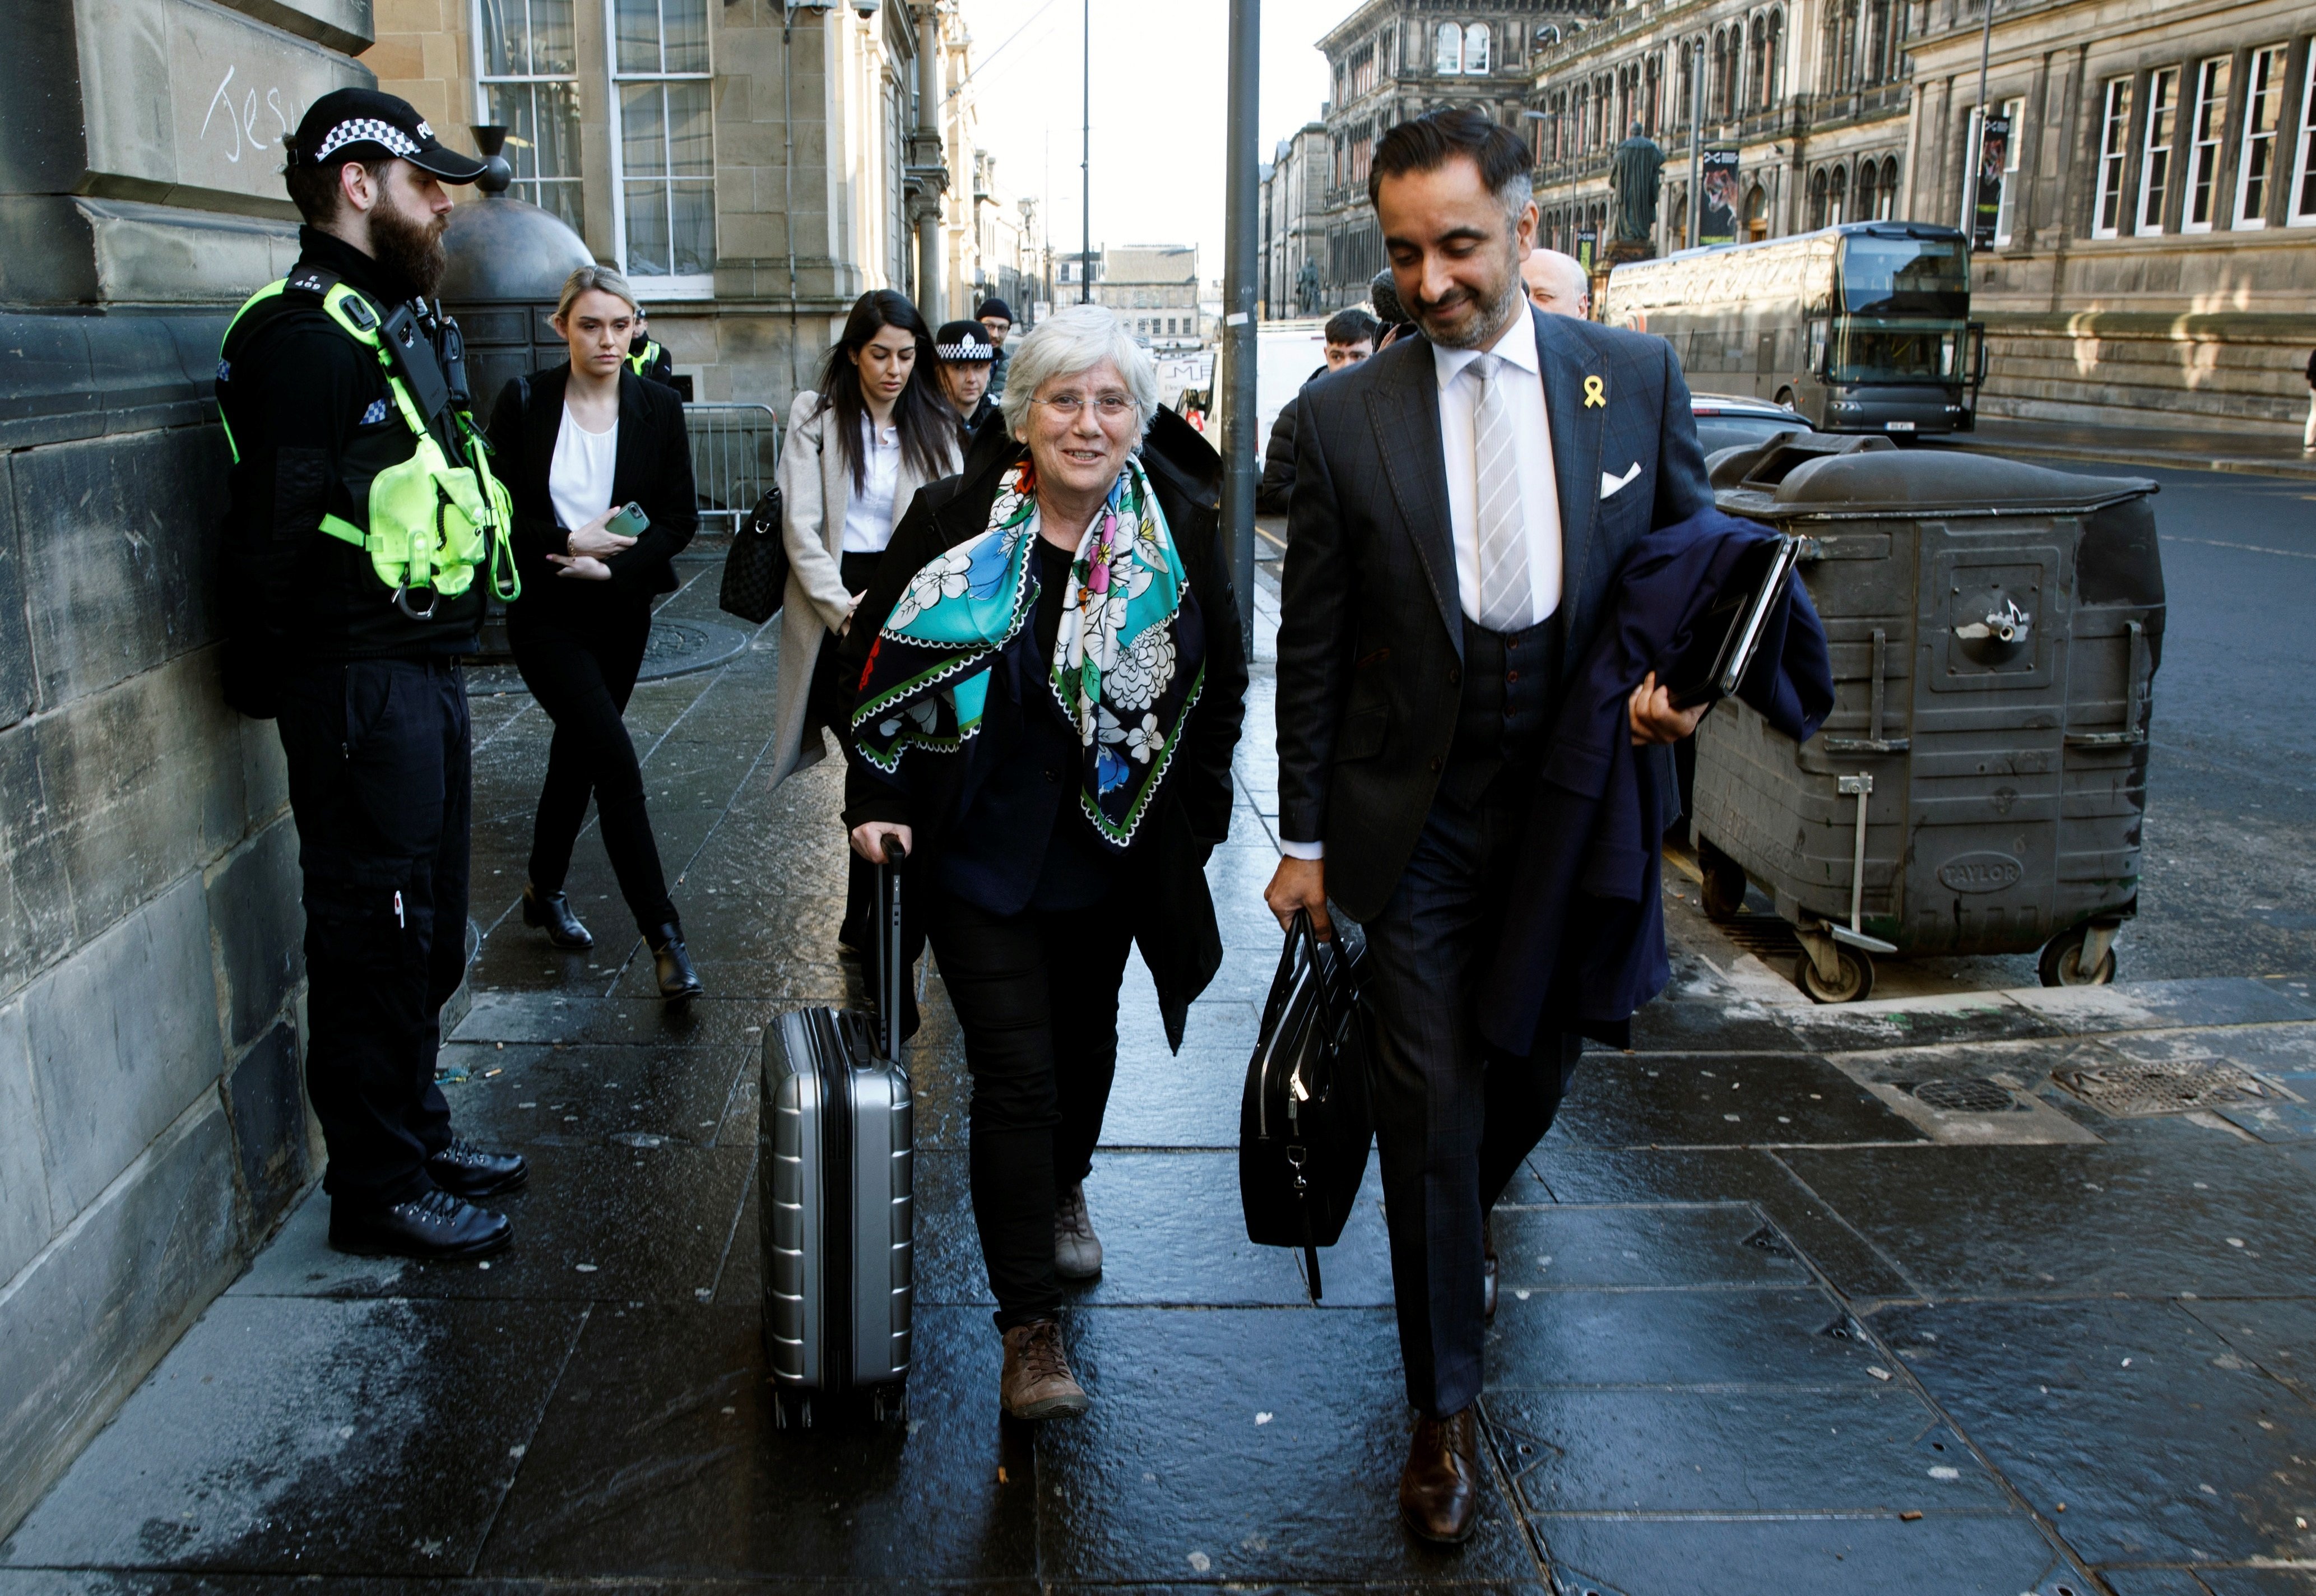 Ponsatí, cautious after court hearing: "Spain is acting in an un-European way"